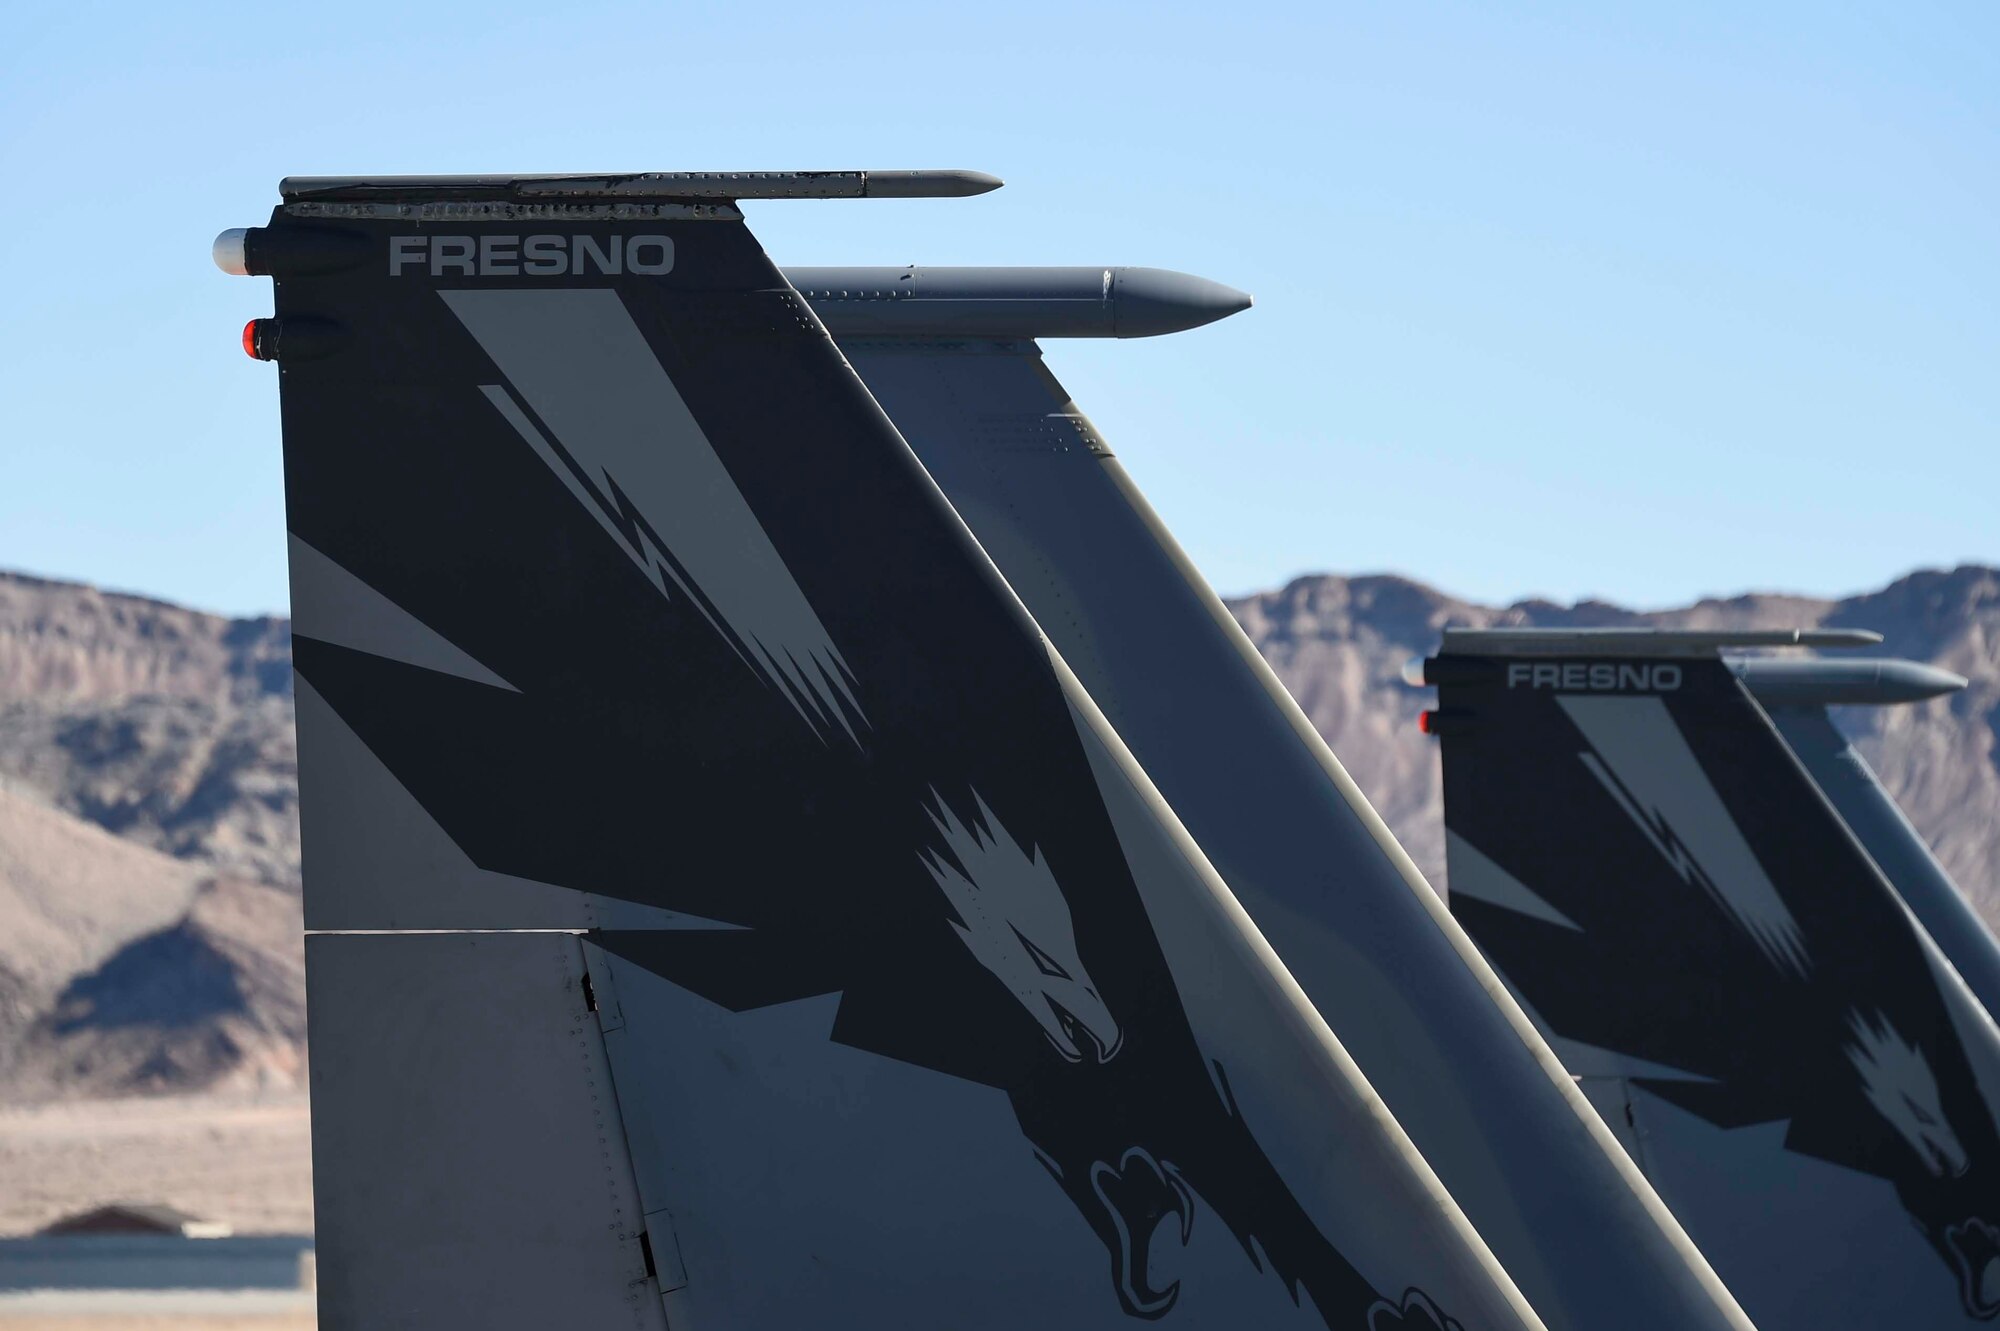 U.S. Air Force F-15C Eagles assigned to the 144th Fighter Wing, Fresno Air National Guard Base, Calif. participate in Red Flag 16-1 held at Nellis Air Force Base, Nev., Jan. 25-Feb. 12. The 144th FW along with more than 30 other units from the U.S. and its allies are participating in this realistic combat training exercise, allowing them the opportunity to train to fight together in a peacetime environment. (U.S. Air National Guard photo by Senior Airman Klynne Pearl Serrano)